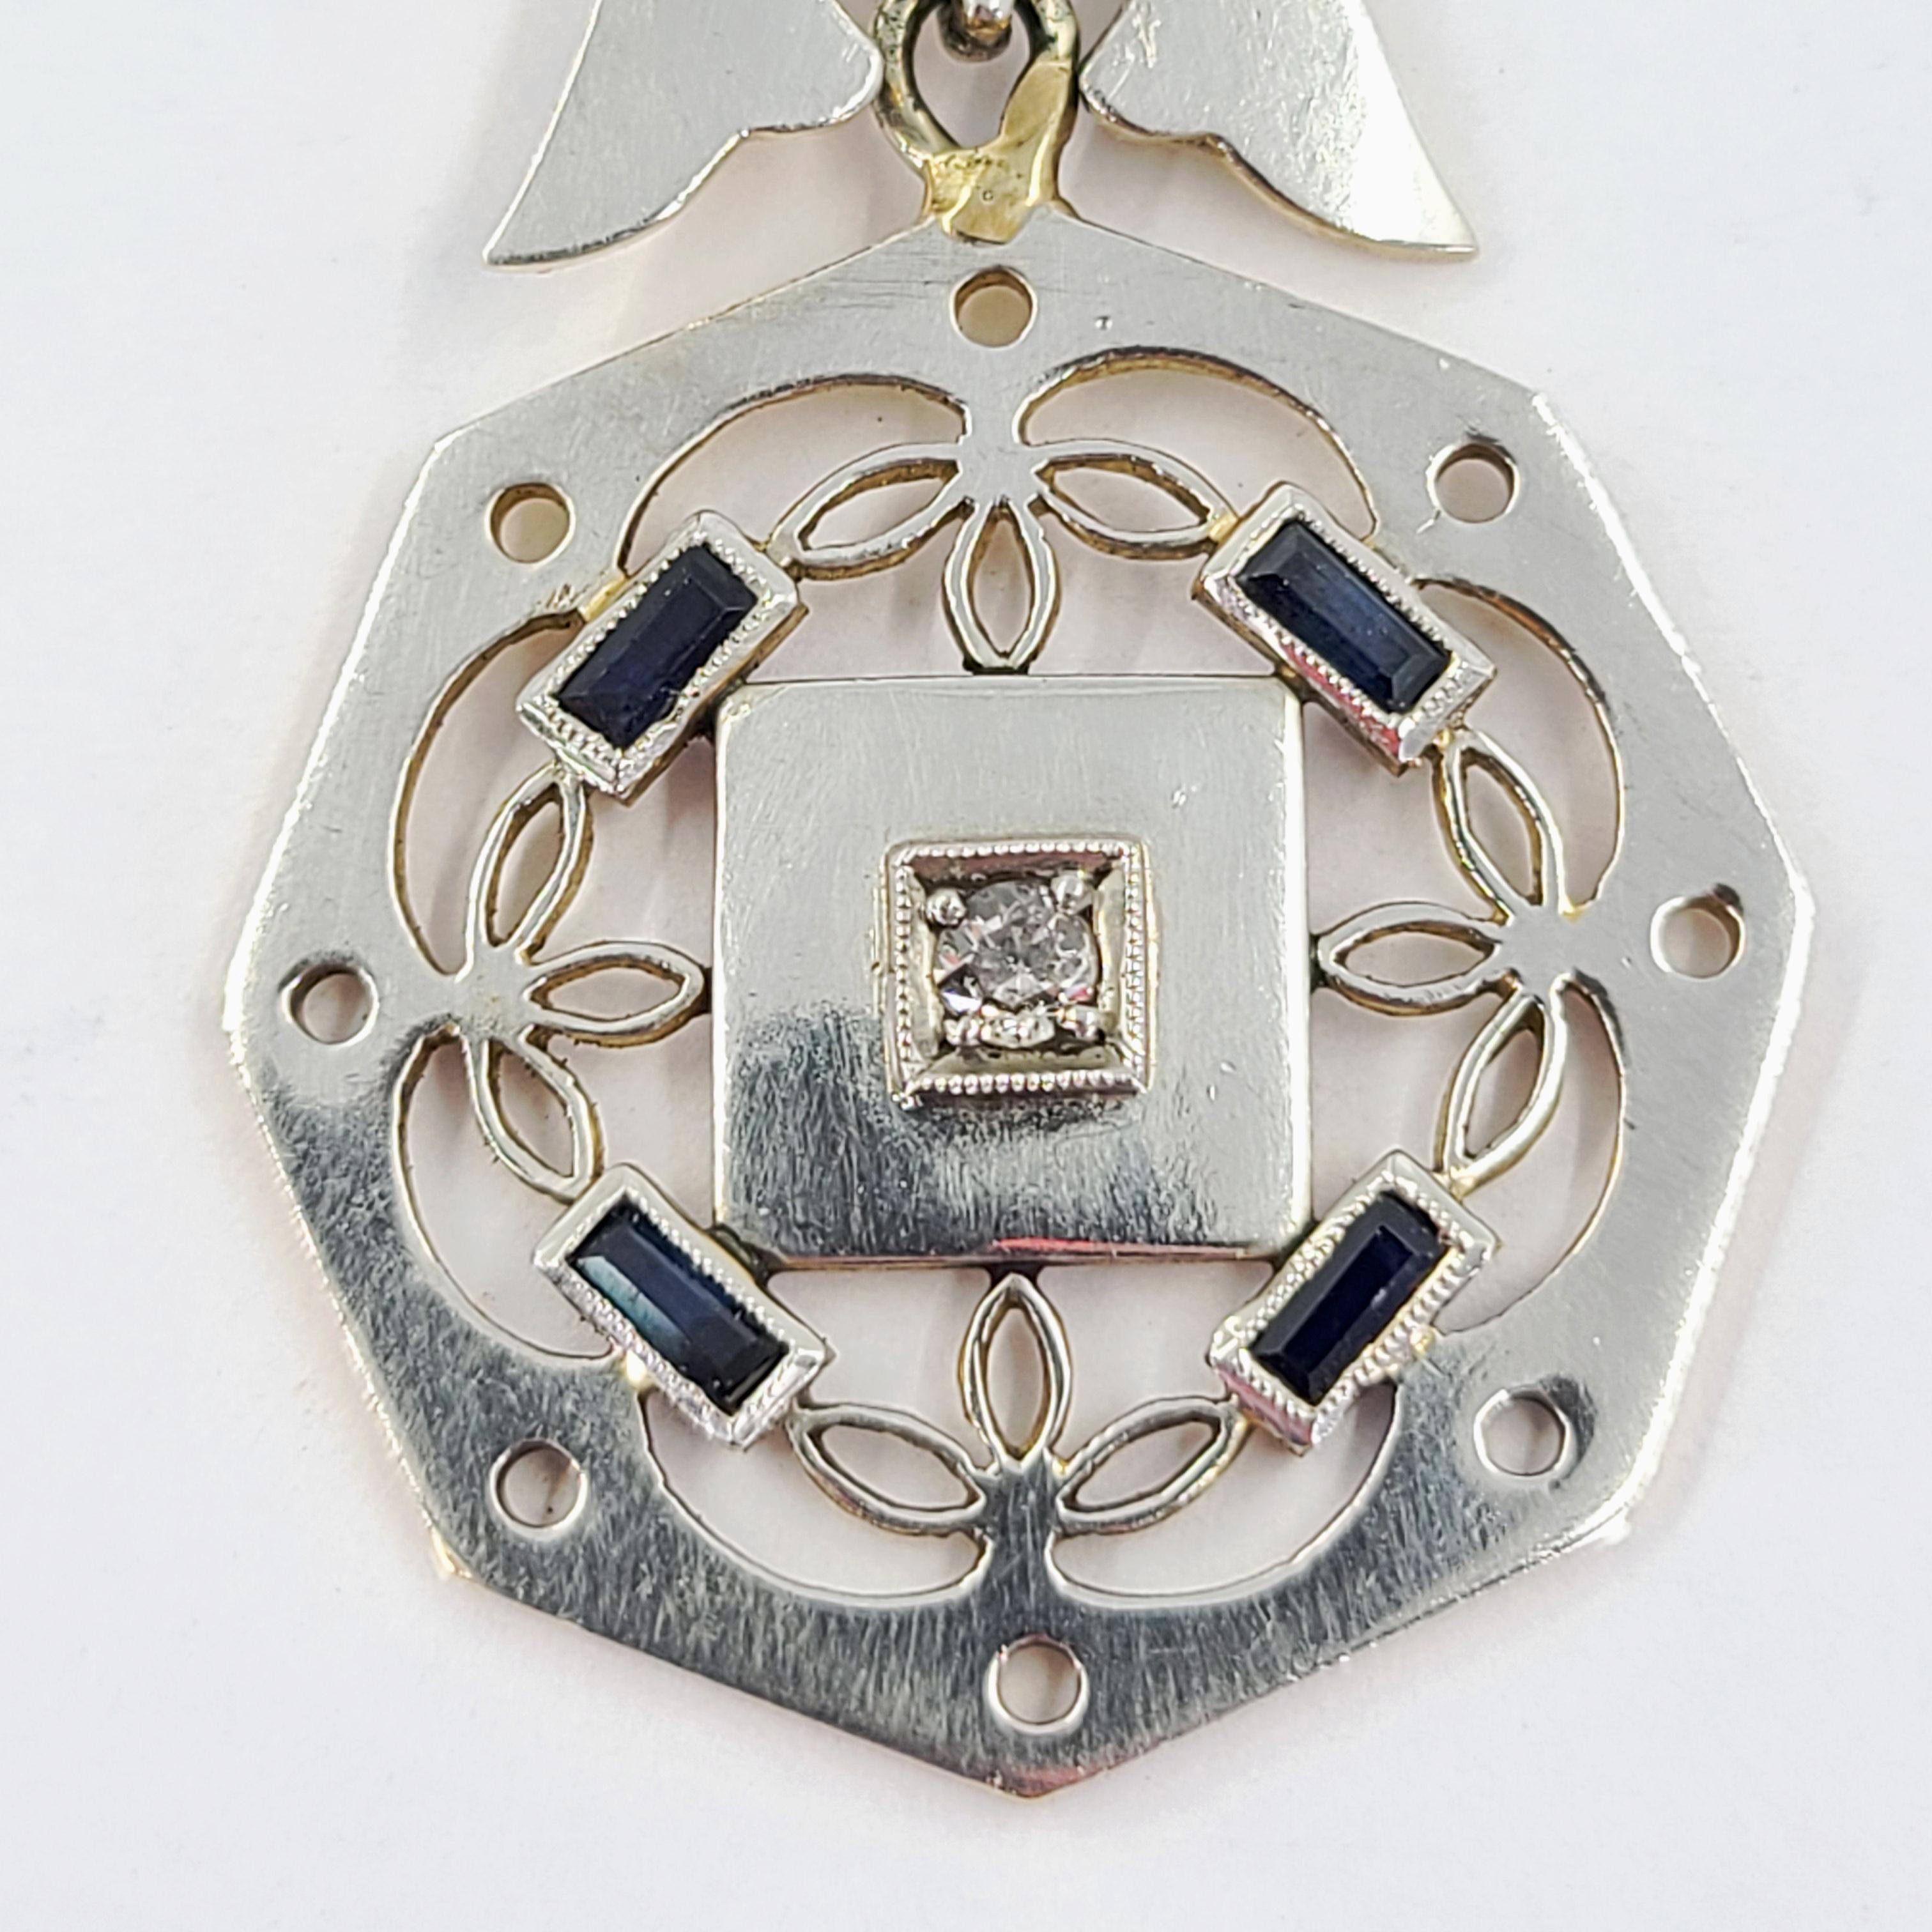 Antique 18 Karat White & Yellow Gold Watch Fob Featuring 1 Old Mine Cut Diamond Weighing 0.05 Carats & 4 Baguette Cut Sapphires Totaling 0.10 Carats. Finished Weight Is 11.4 Grams. 5.25 Inches Long.